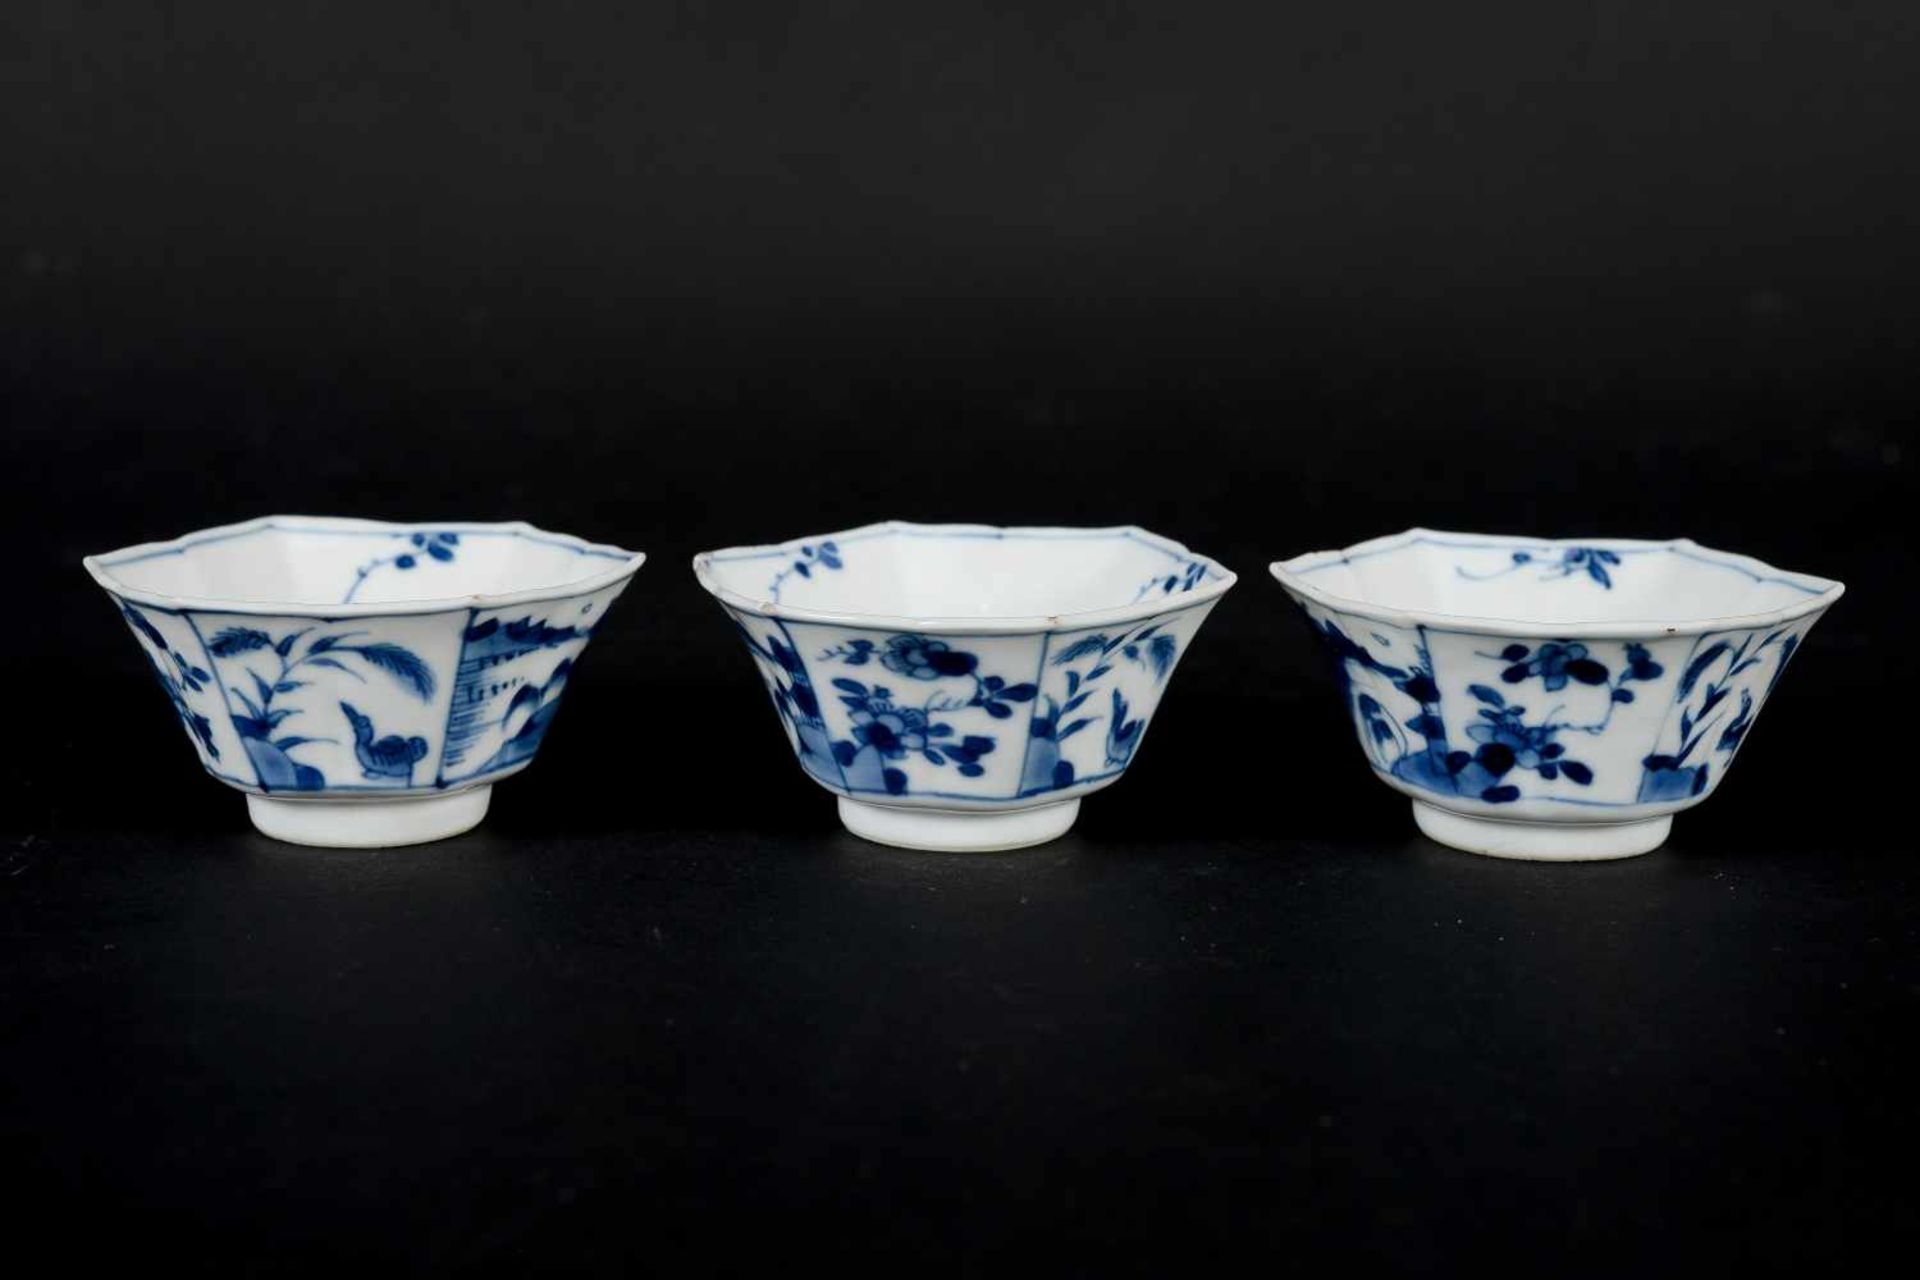 A set of three hexagonal blue and white porcelain cups with saucers, decorated with ducks, flowers - Image 9 of 12